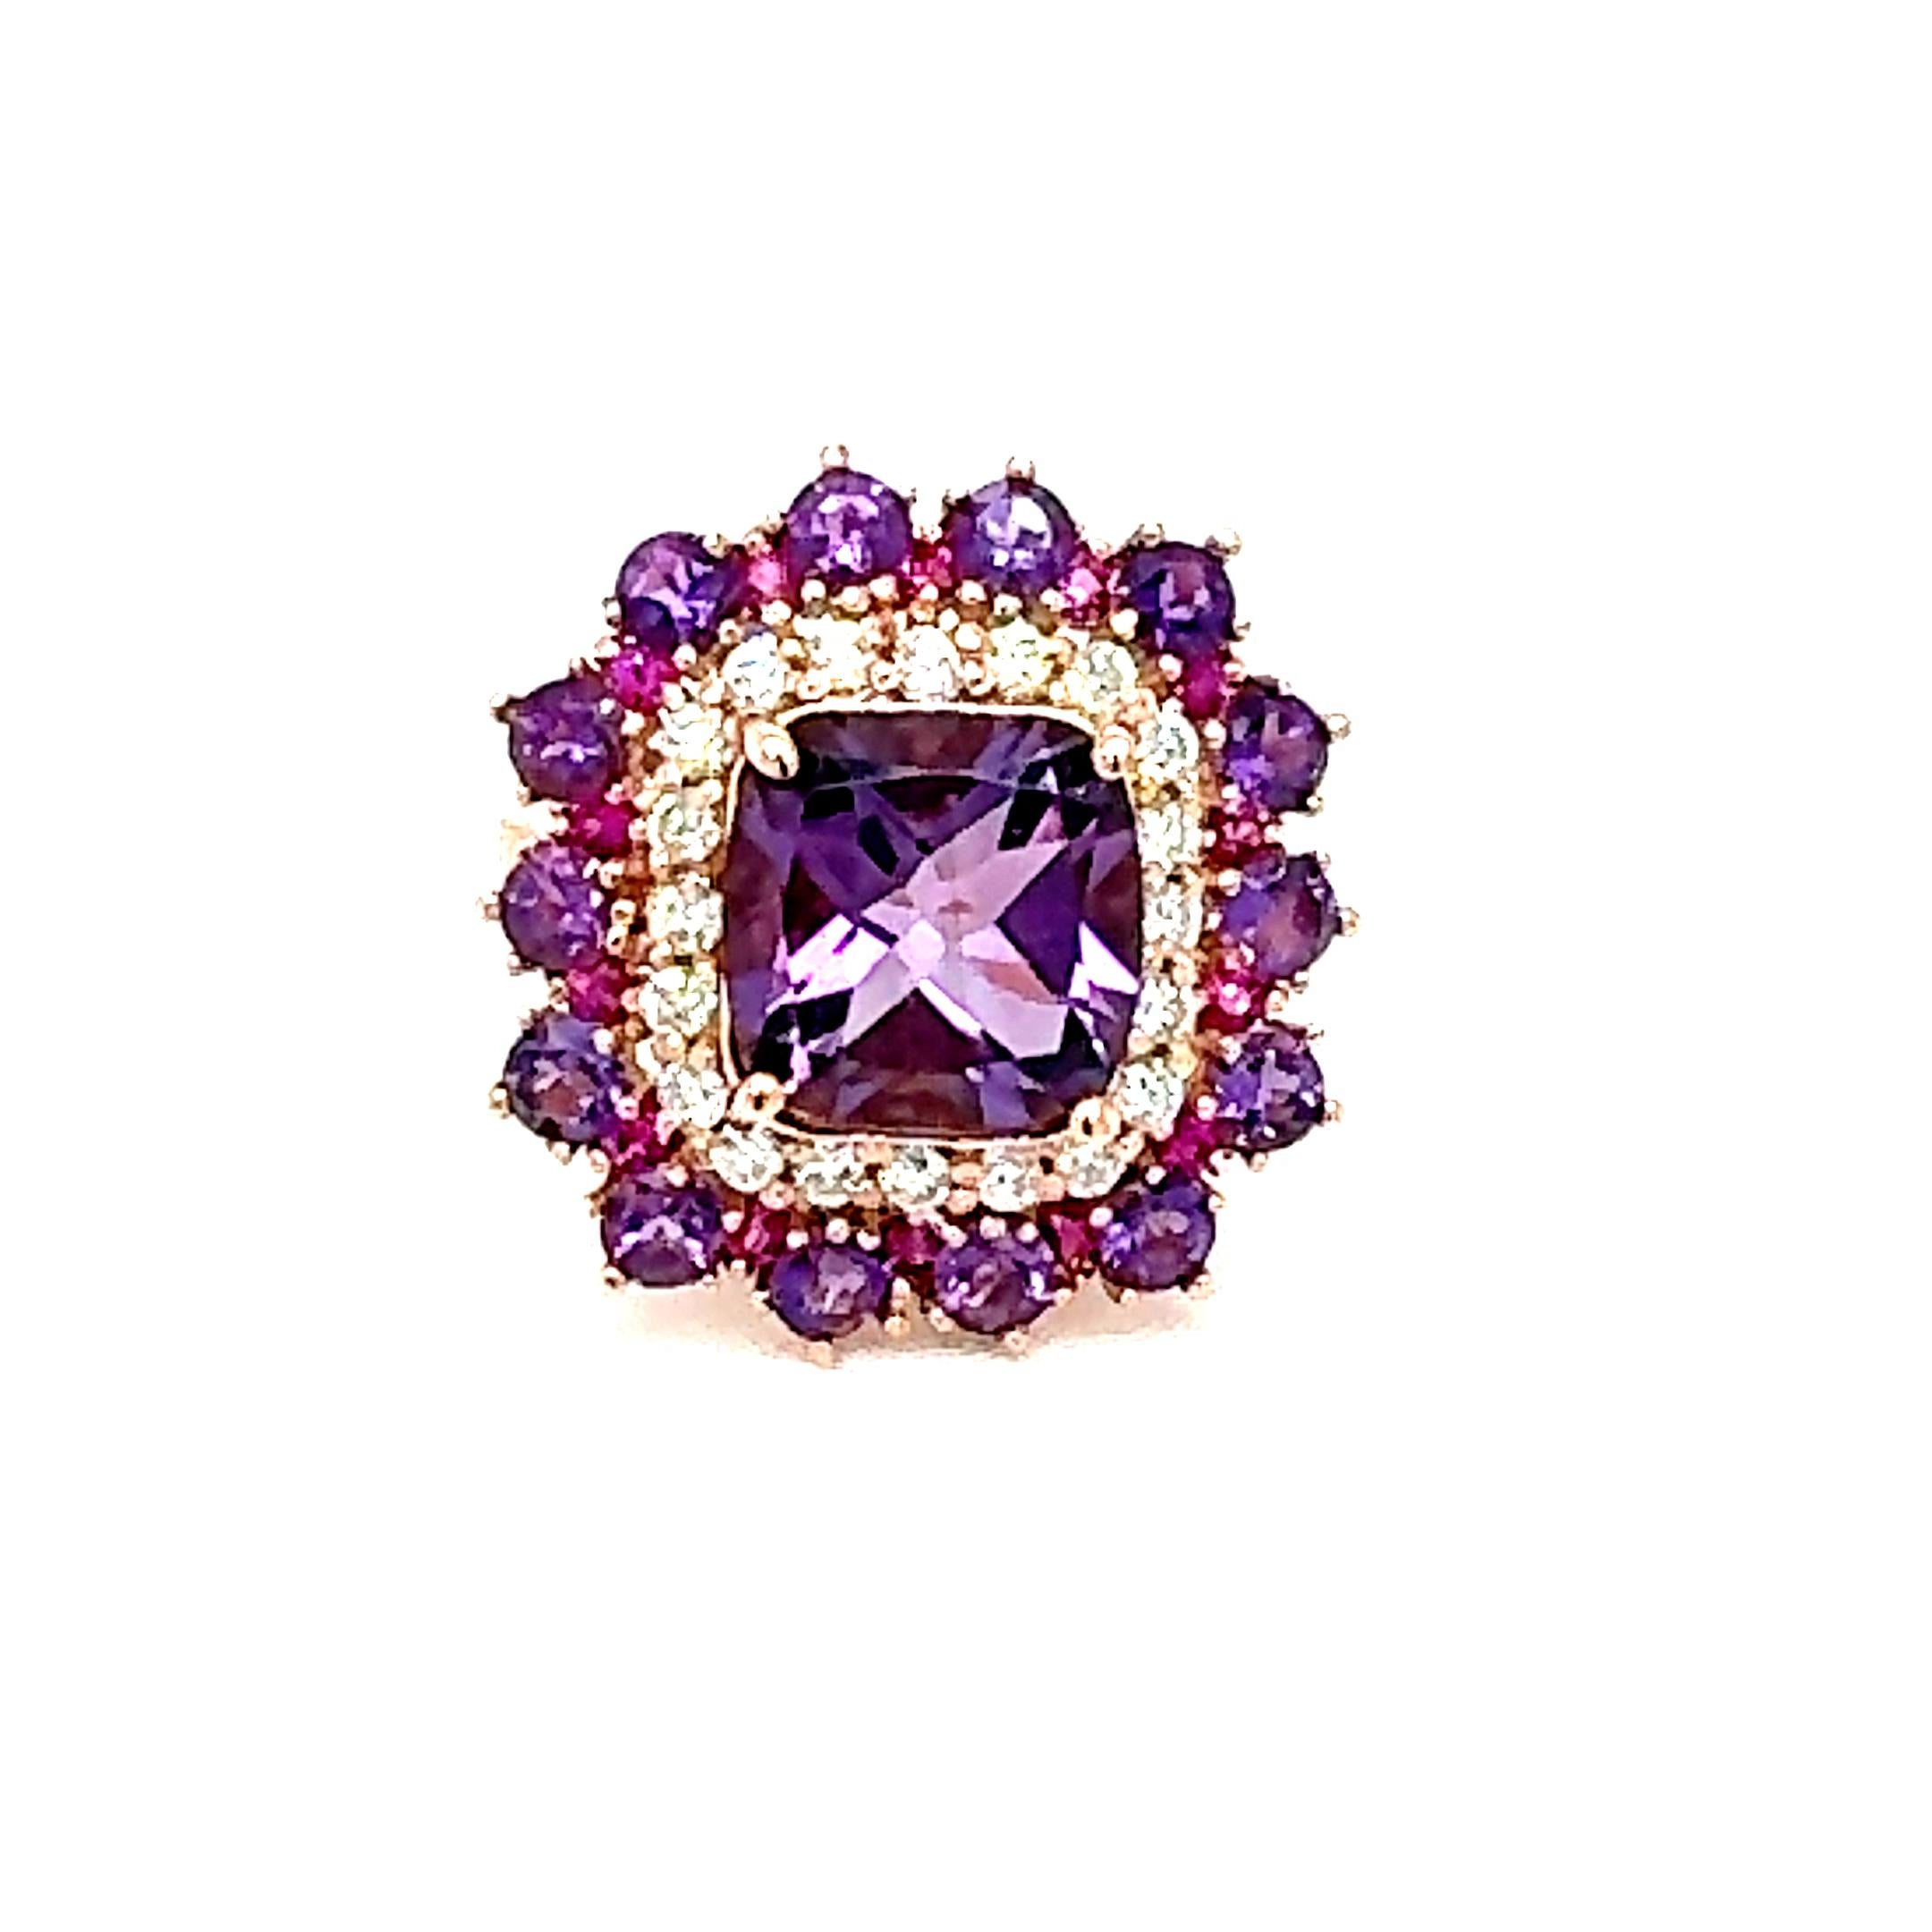 5.67 Carat Cushion Cut Amethyst Pink Sapphire Diamond Rose Gold Cocktail Ring

Beautiful to say the Least! 

This Ring has a magnificent Cushion Cut Amethyst that weighs 3.93 Carats and is surrounded by 14 Round Cut Amethysts that weigh 1.43 Carats